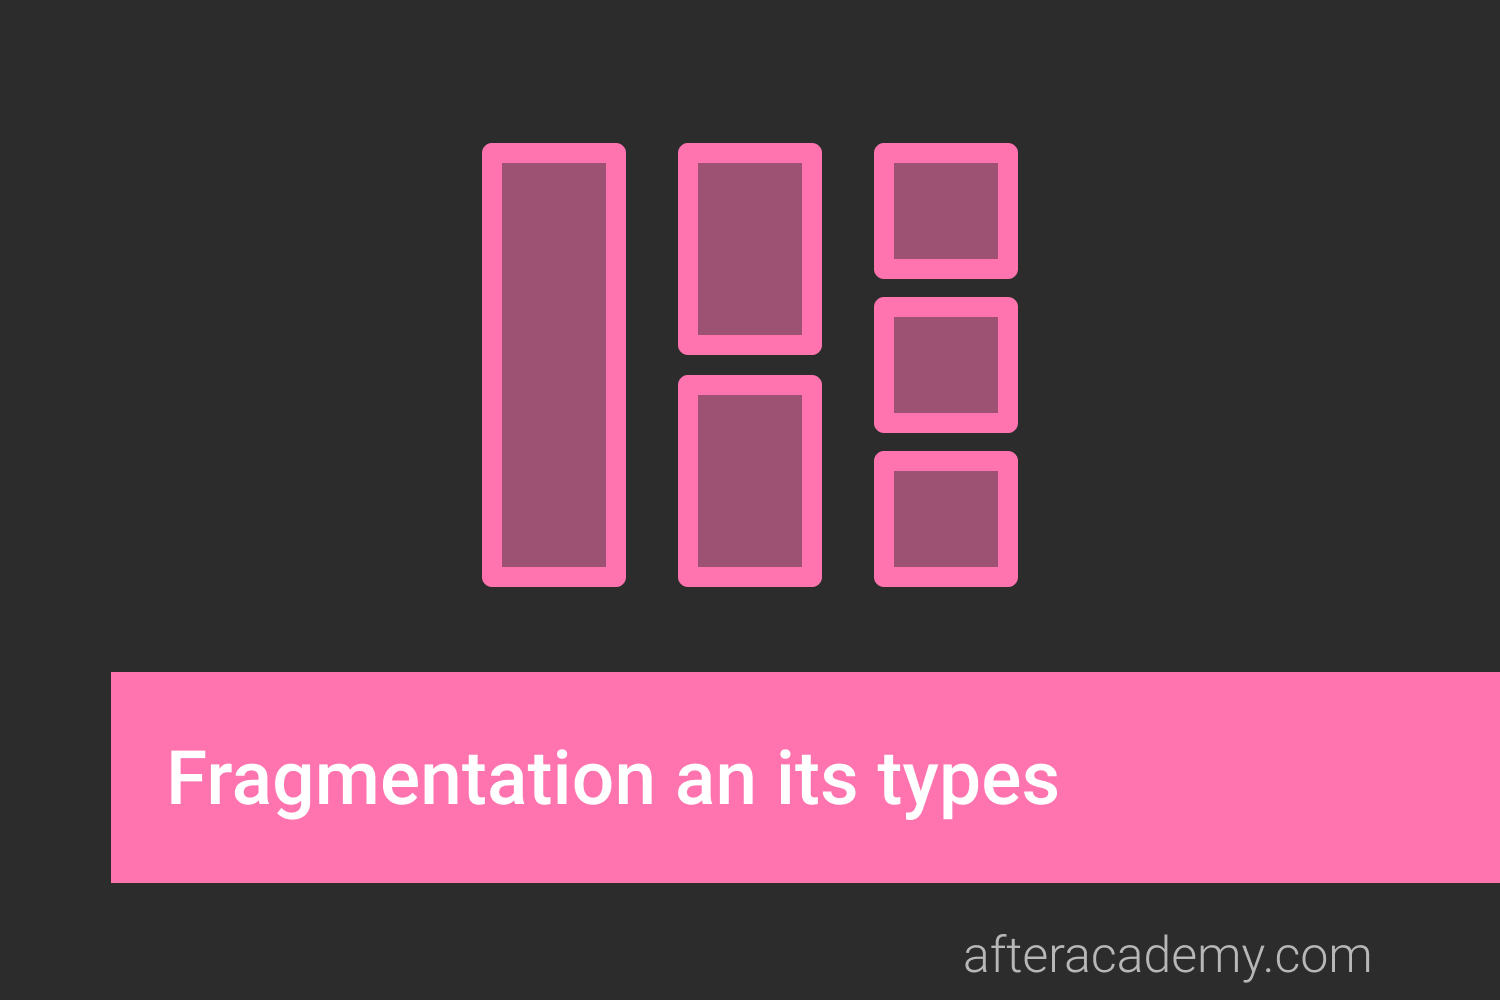 What is Fragmentation and what are its types?